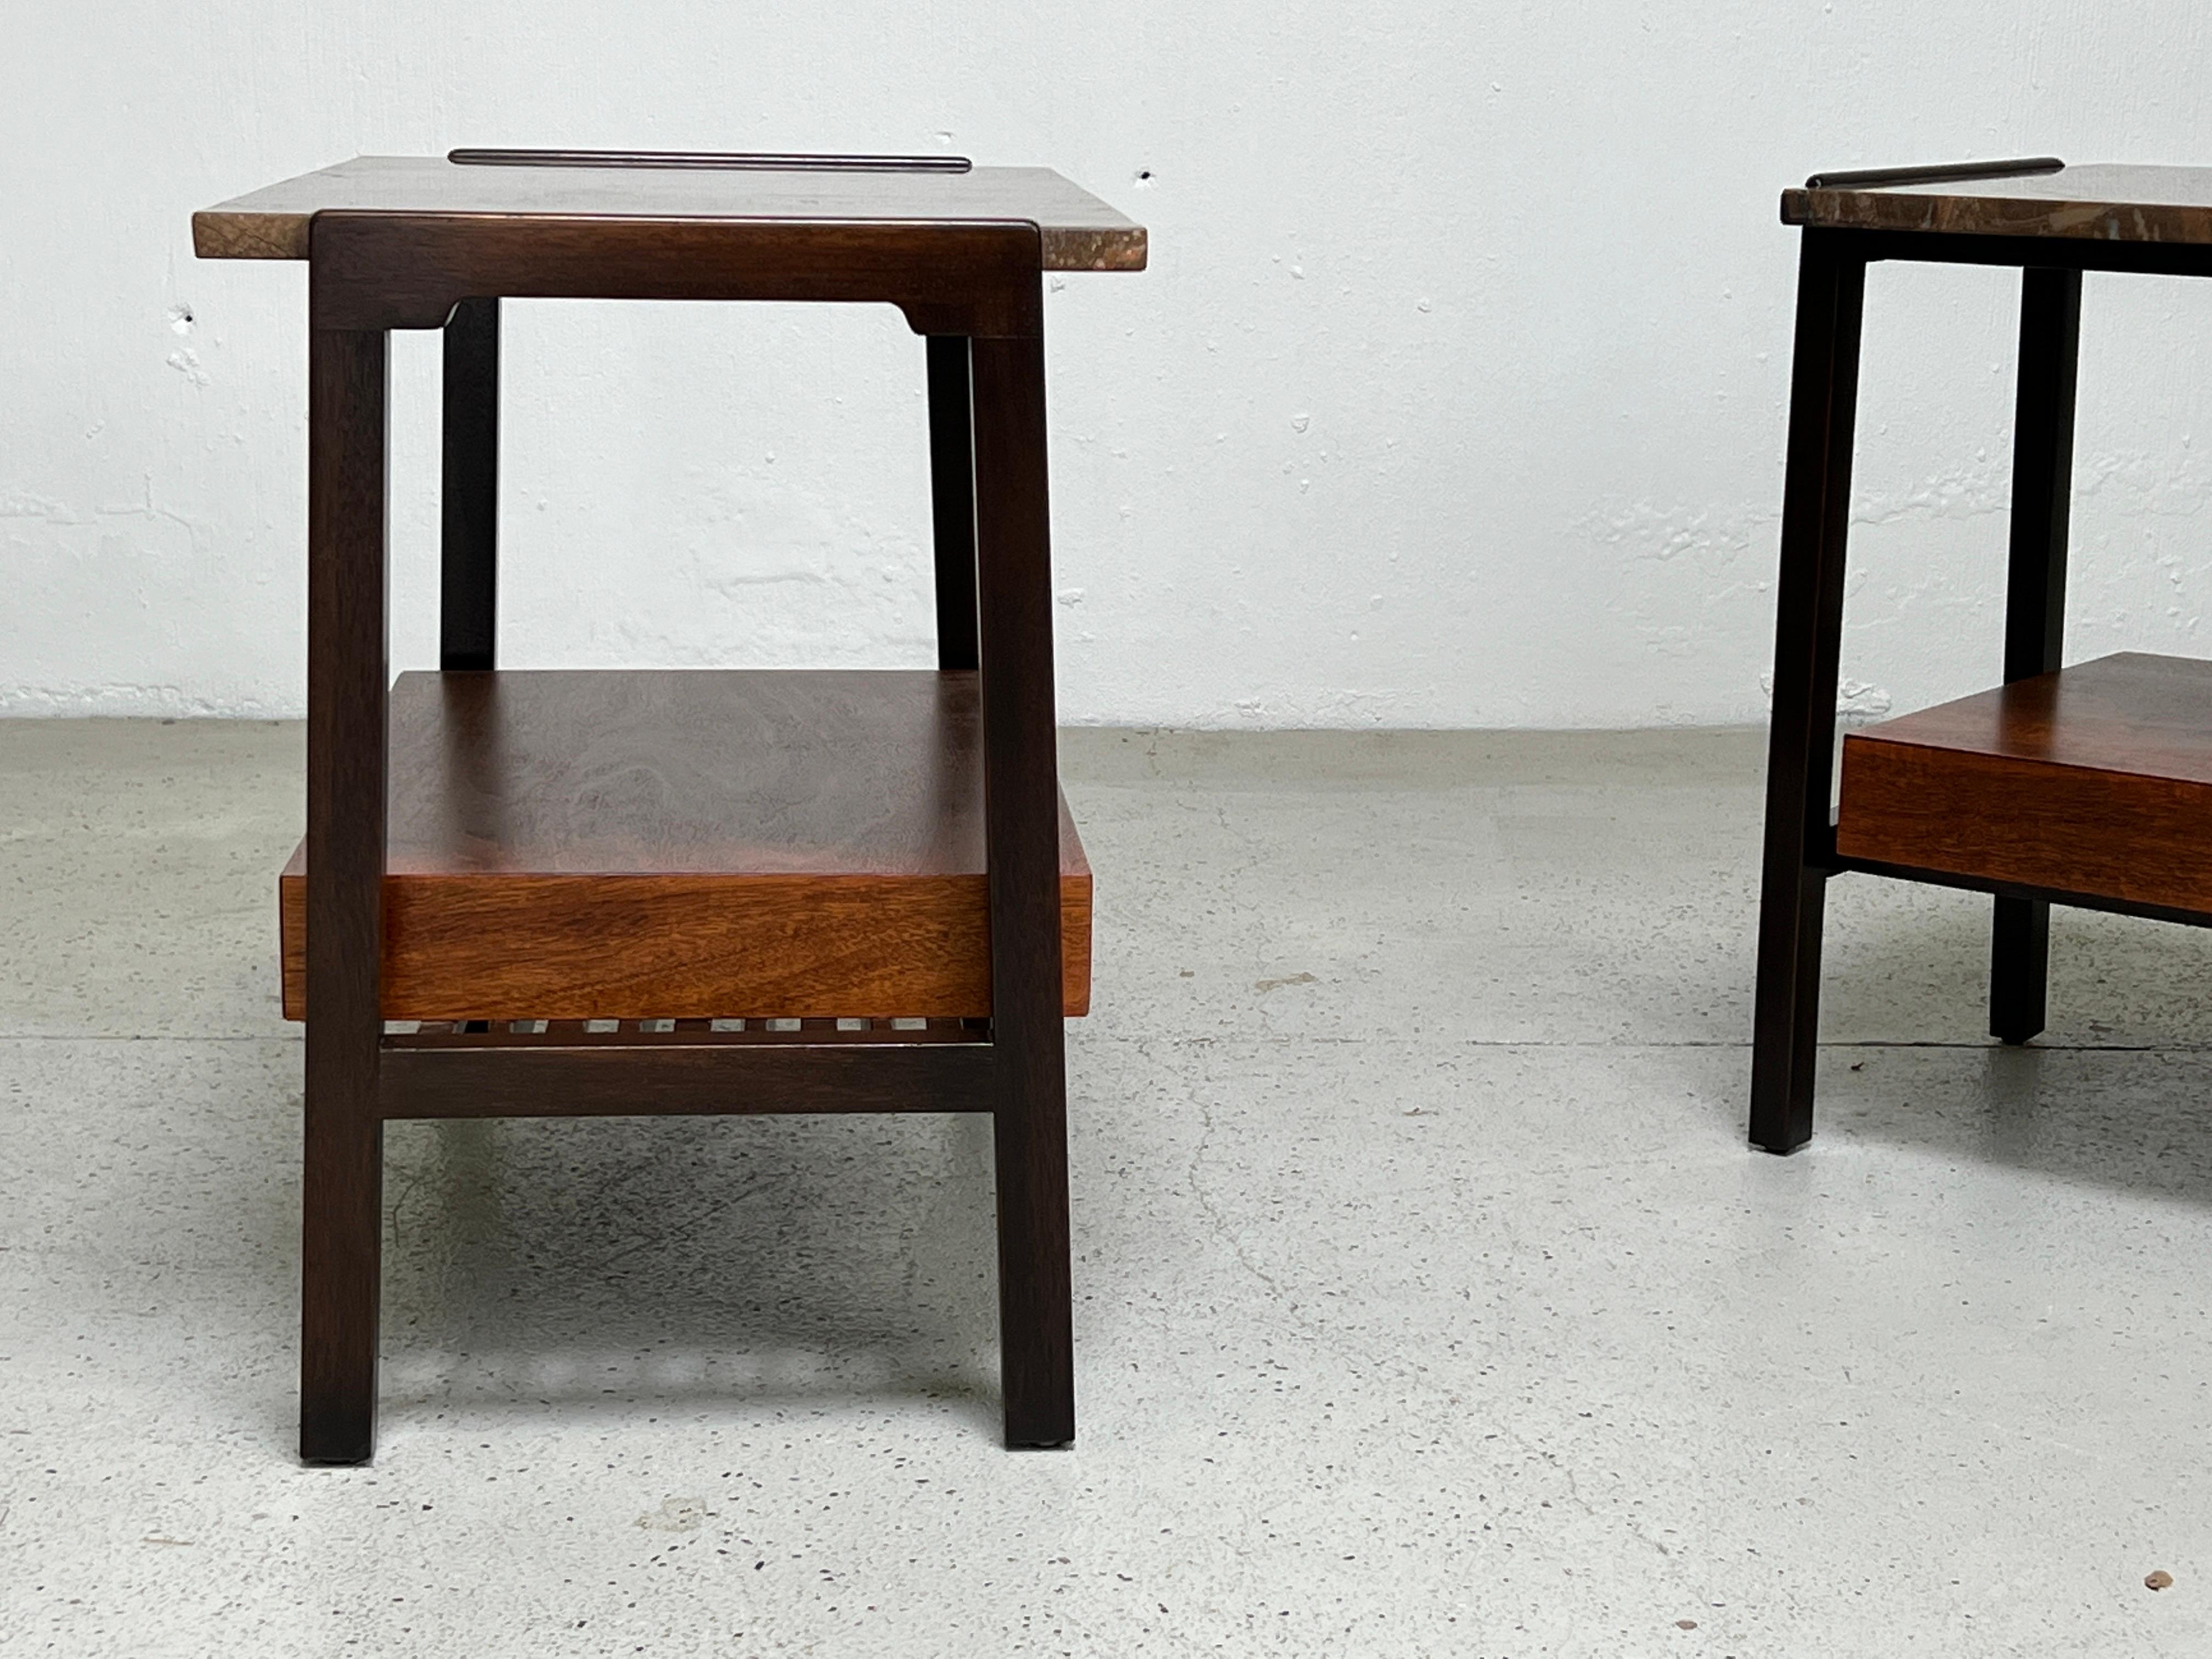 Mid-20th Century Pair of Nightstands by Edward Wormley for Dunbar